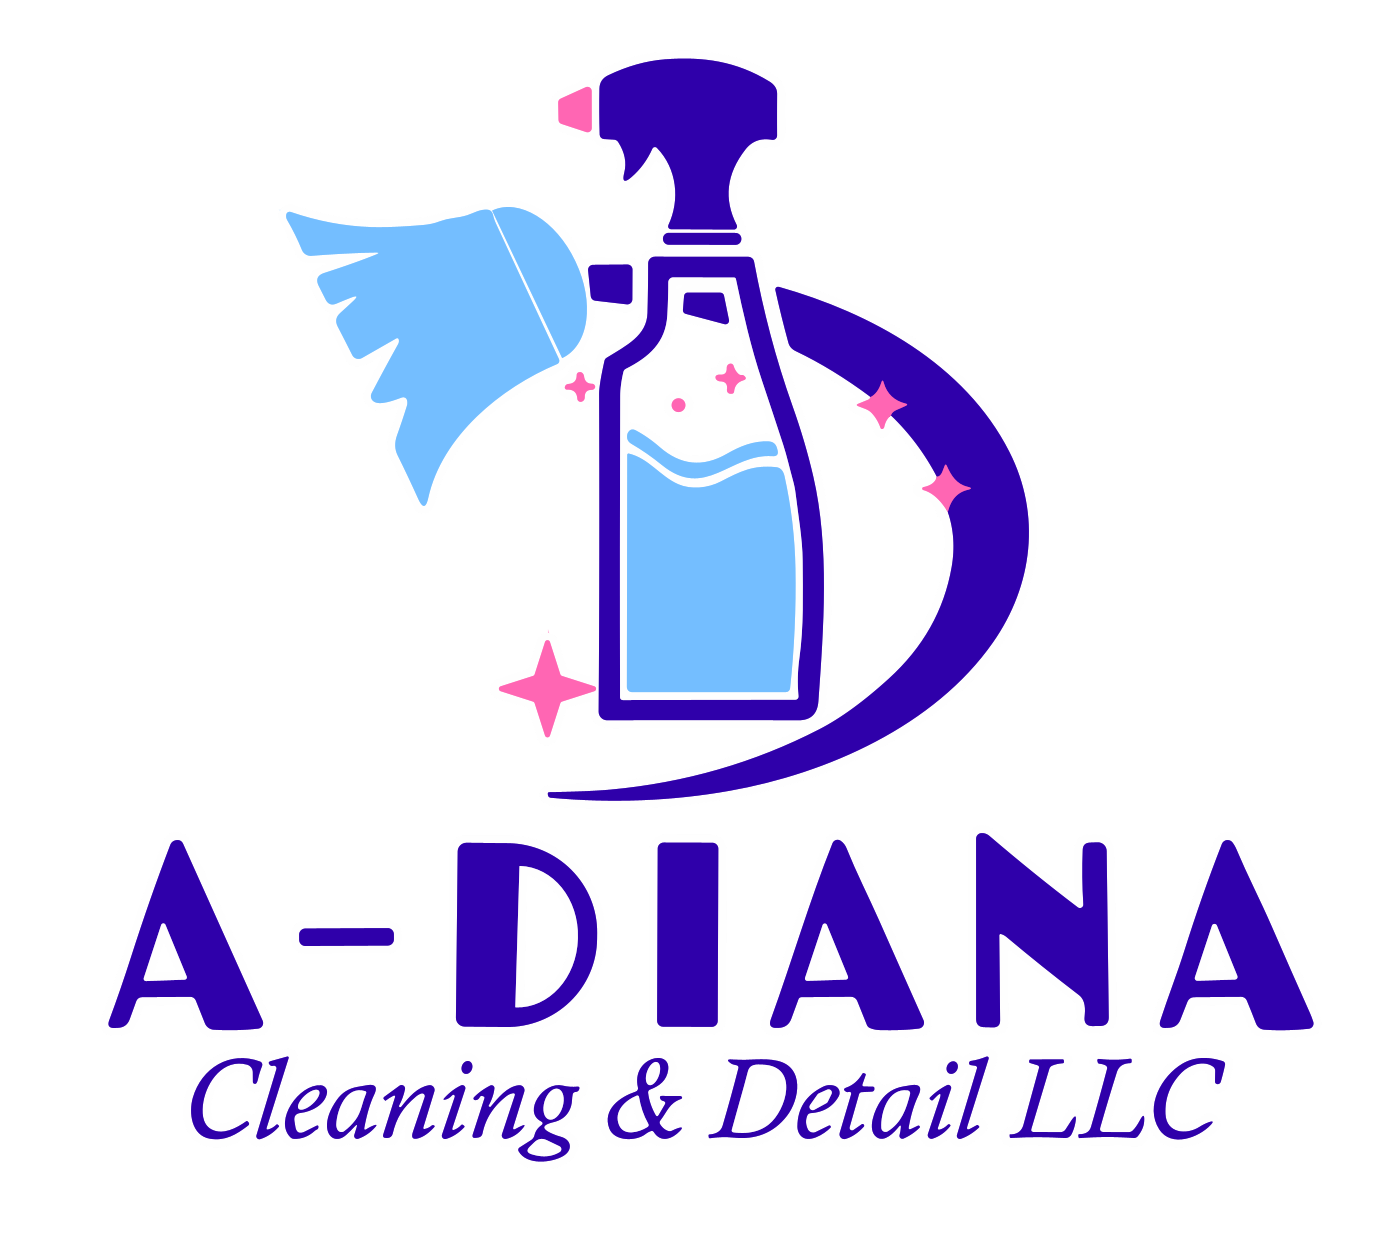 A-Diana cleaning & detail llc offers services of Residential Cleaning, Deep Cleaning, Move Out In Cleaning, Airbnb Cleaning, Construction Cleaning, Office Cleaning, Floor Cleaning, Spring Clean Up, Leaf Removal, Weed Control in Johns creek, Atlanta, Alpharetta, Dunwoody, Conyers, Stone Mountain - Residential Cleaning